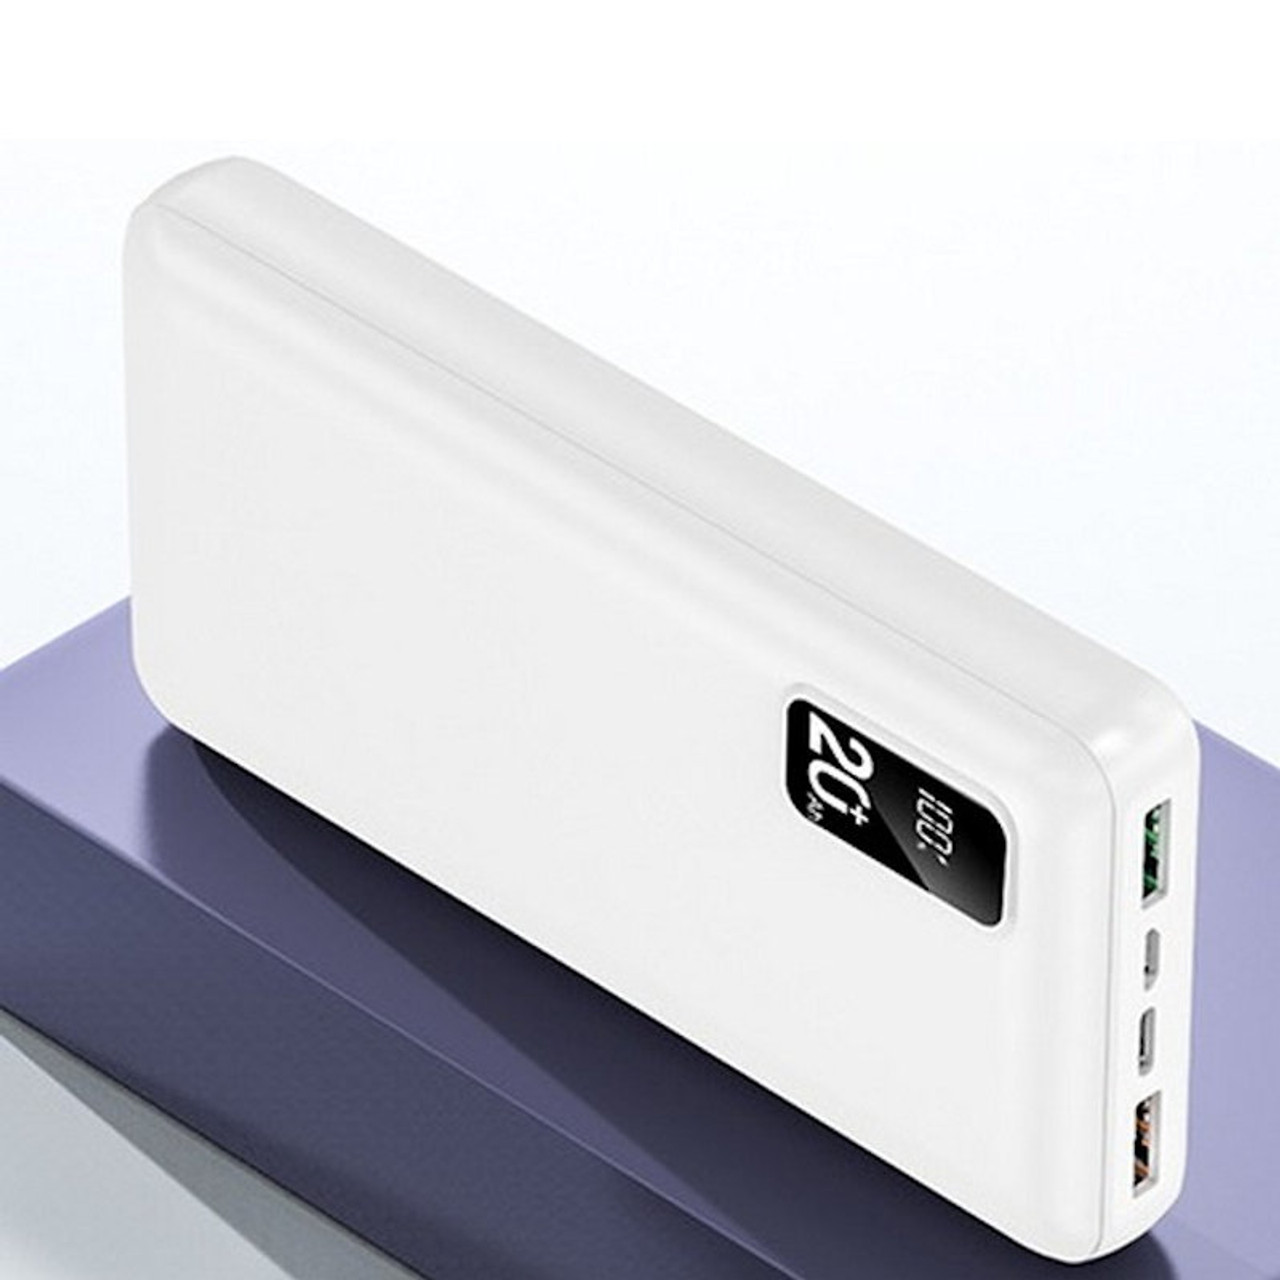 20000mAh PD Power Delivery + Quick Charge 3.0 Fast Charging High-Capacity  Power Bank Battery - White